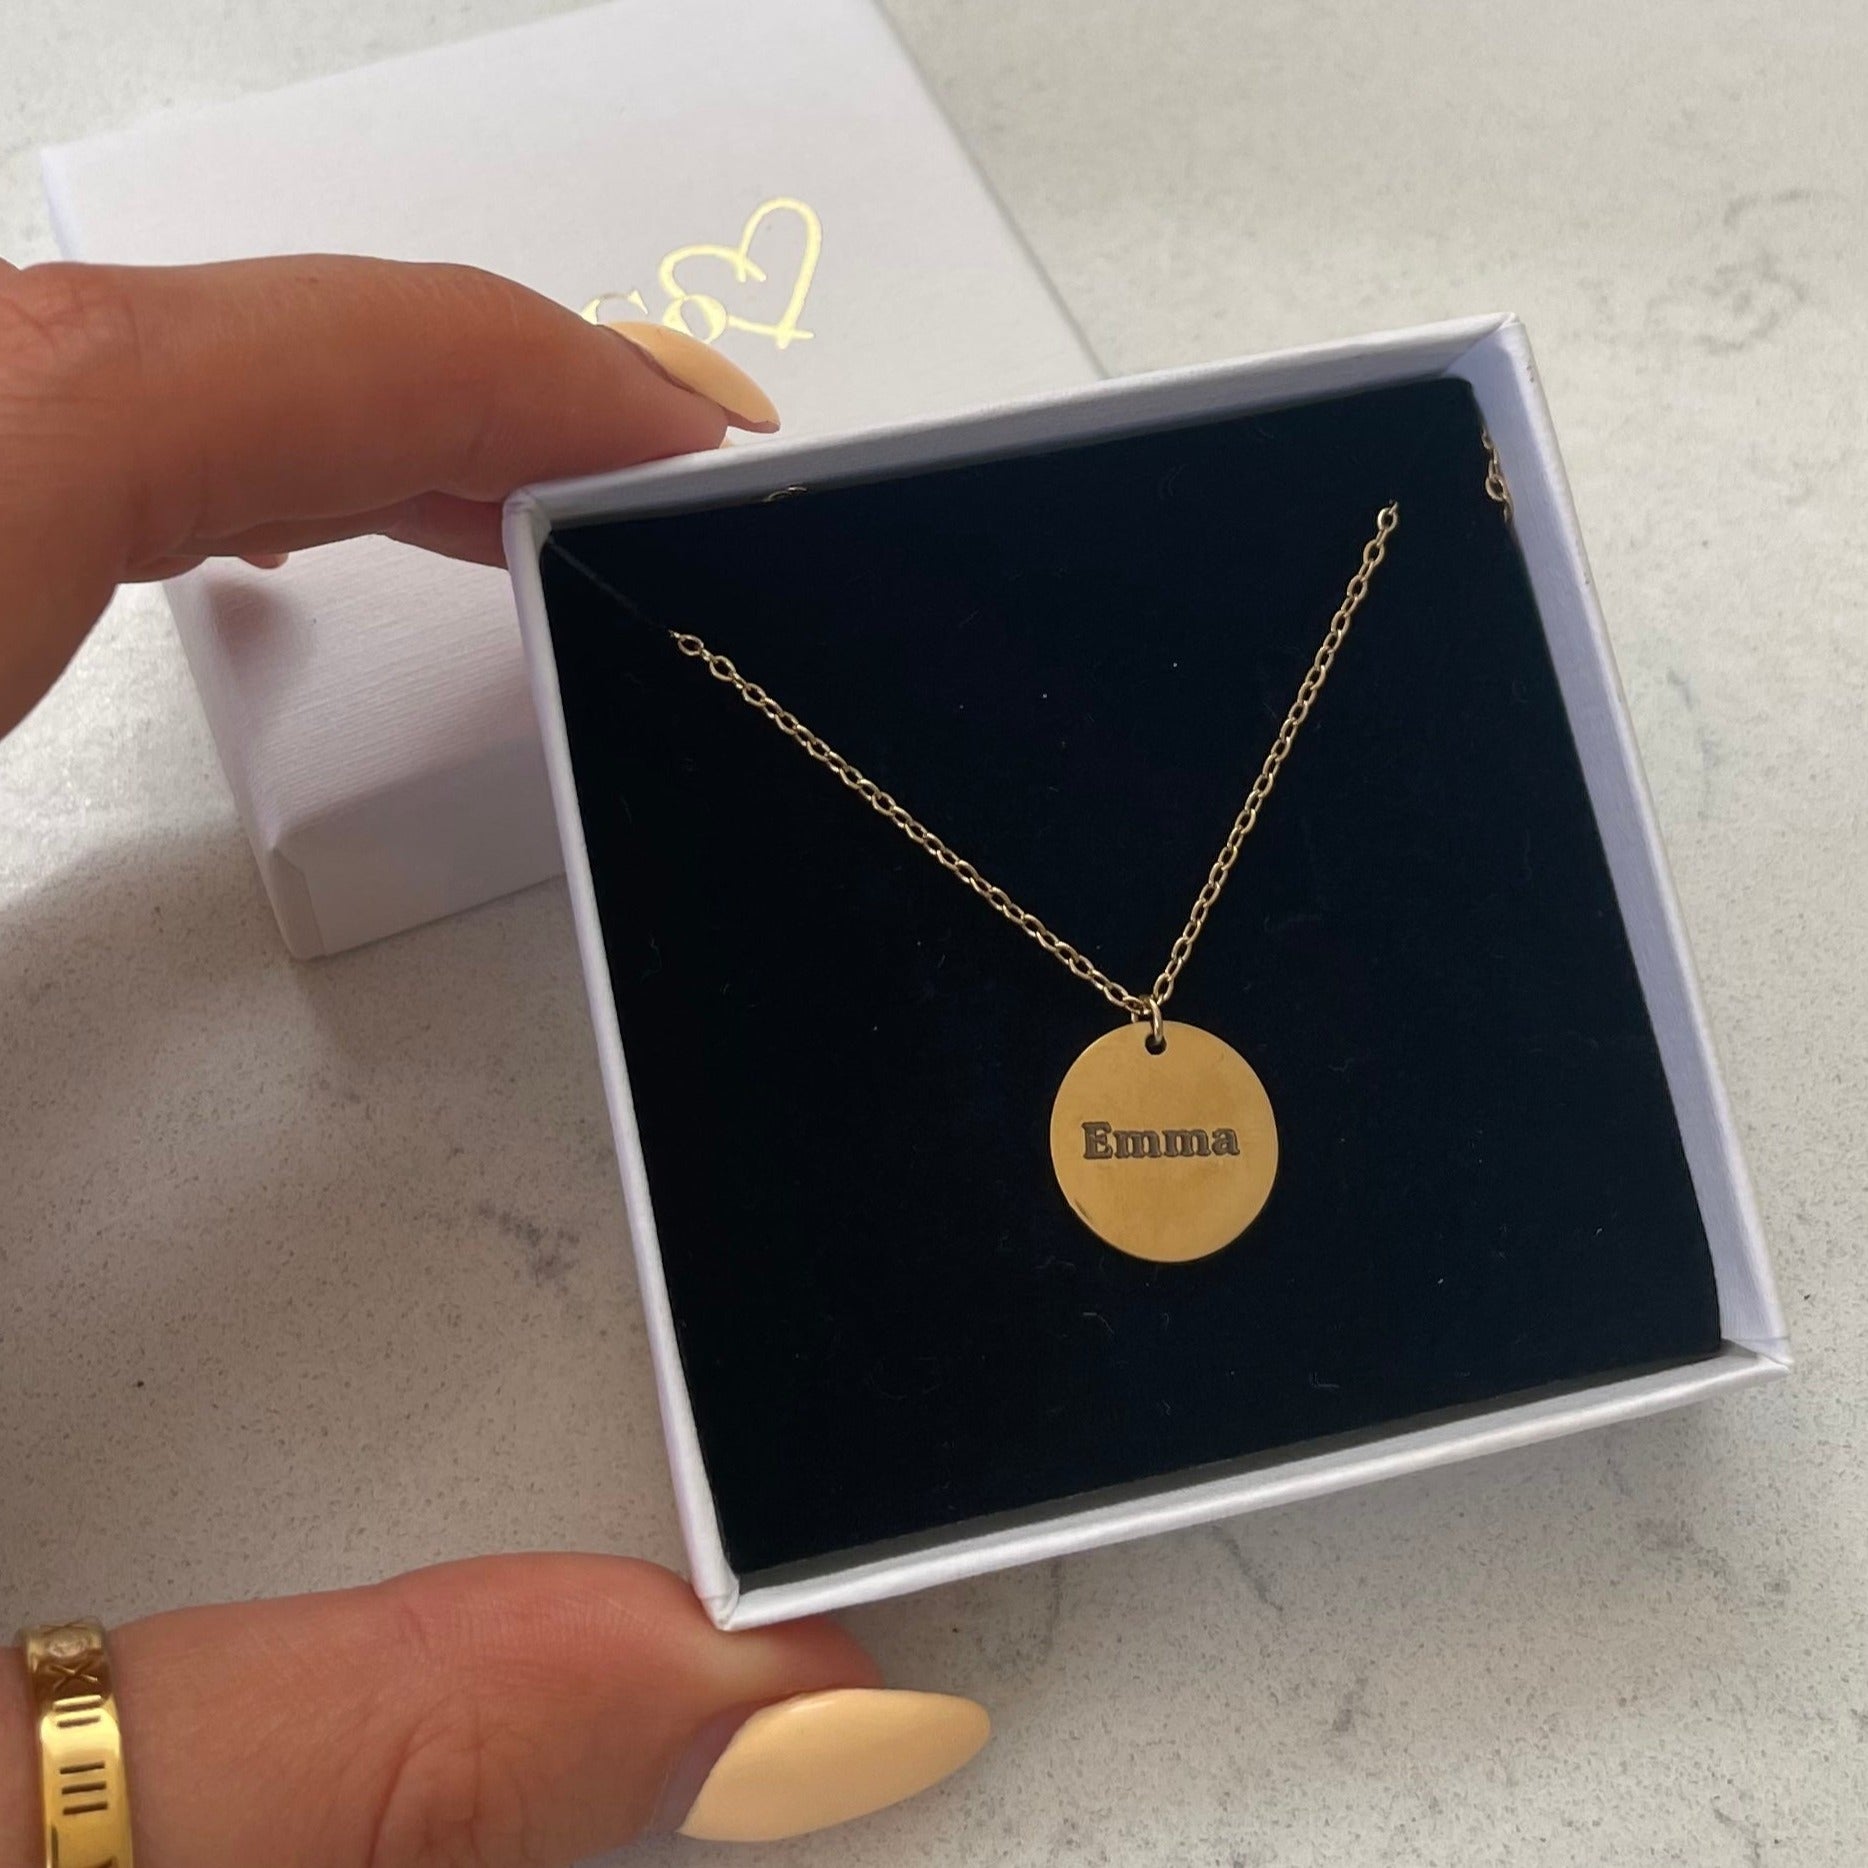 Introducing our Engraved Pendant Bracelet from our Personalised Collection!  All of our pieces are laser engraved- this means it will not fade over time!  Bracelet length- 15cm+2cm.   Both Sides can be engraved.   Available in Gold, Rose Gold & Silver.   Material: Titanium. 